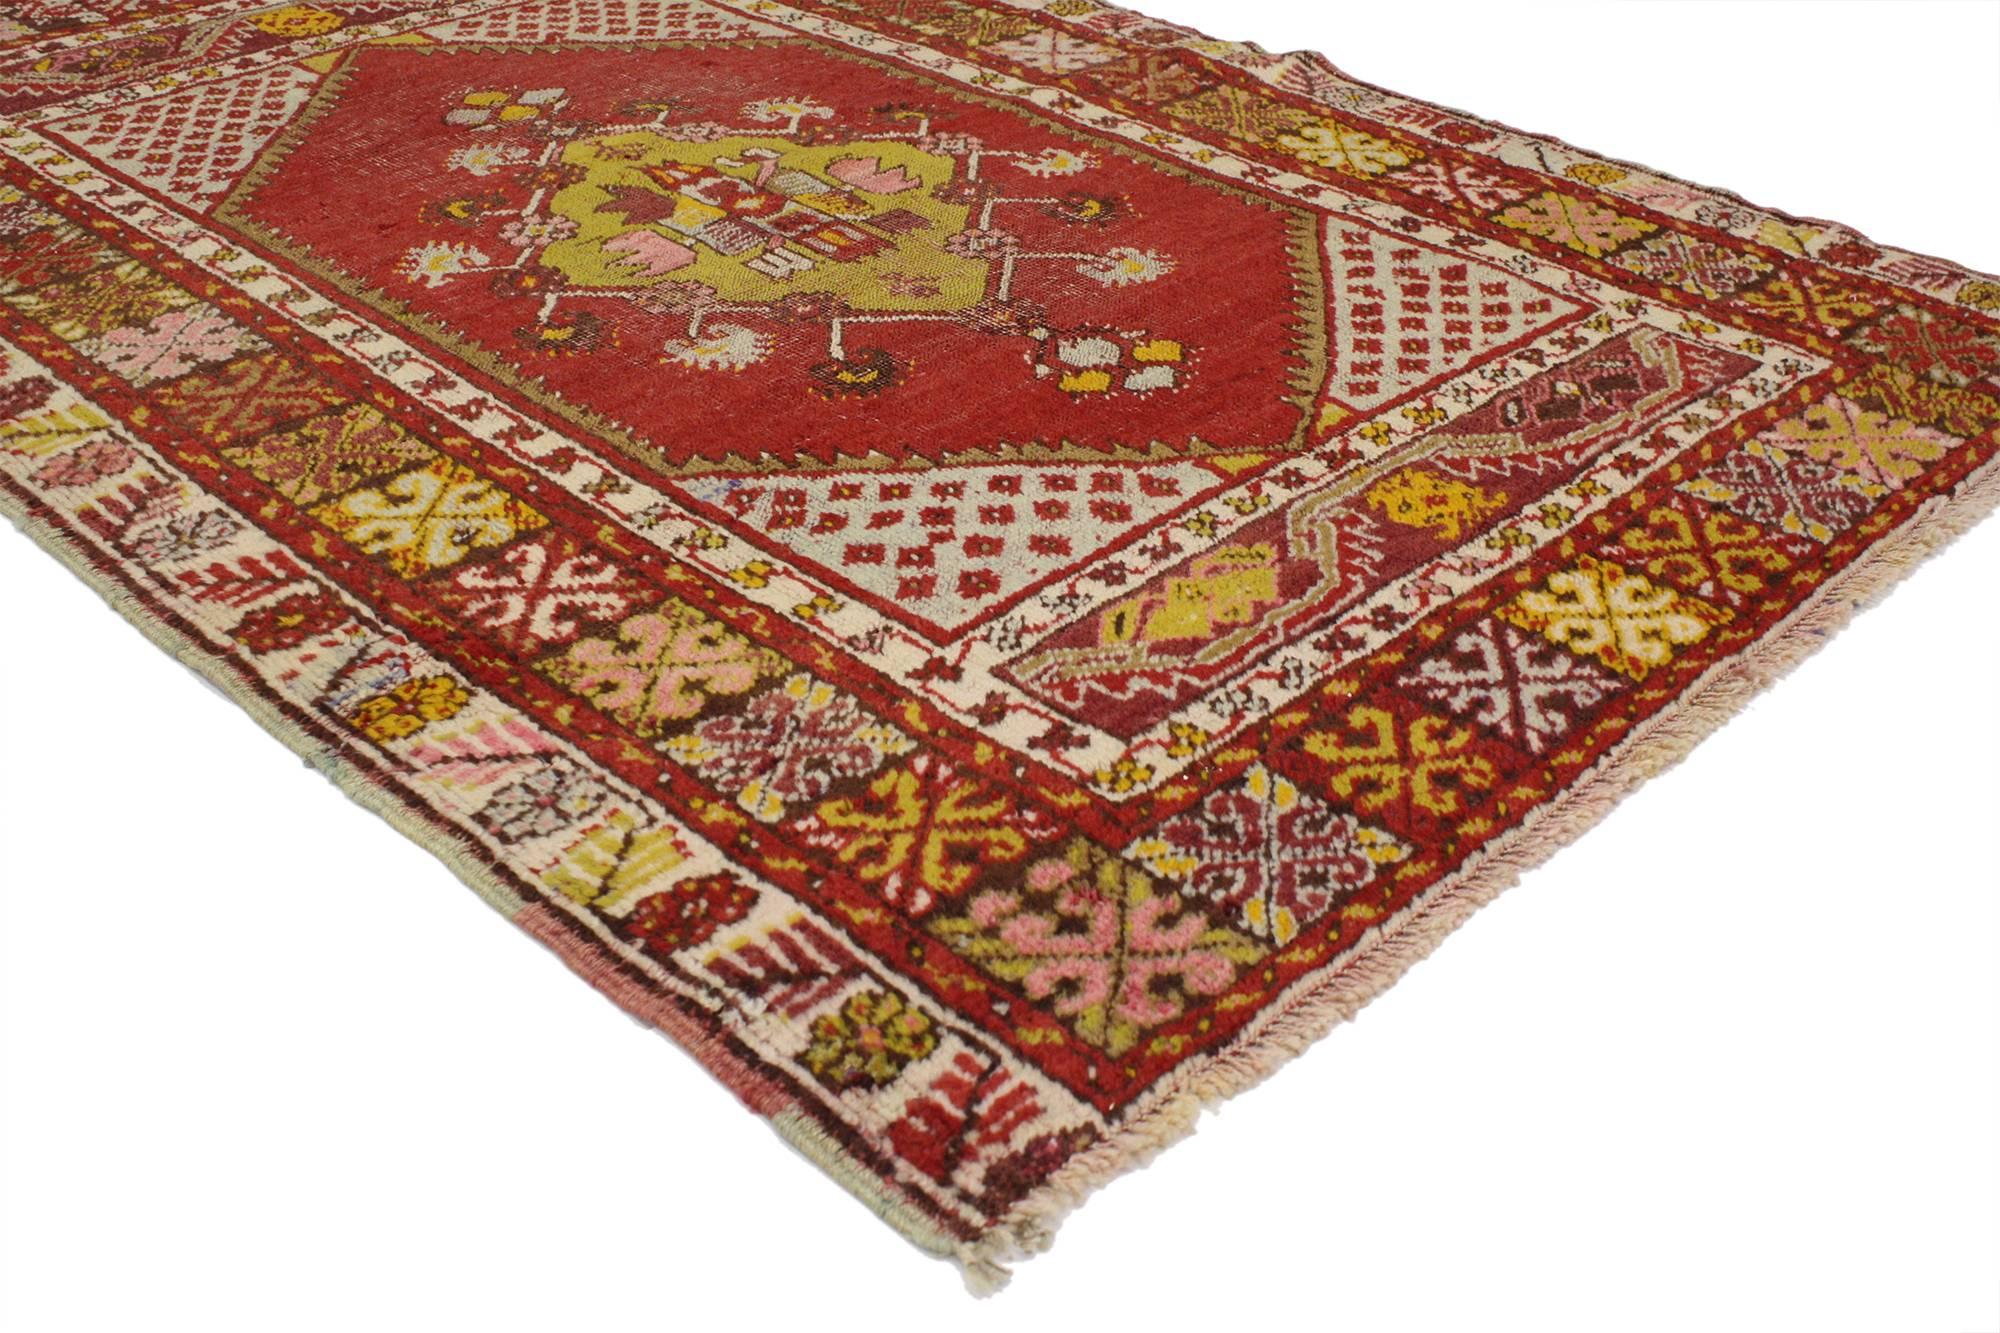 52091 Vintage Turkish Oushak Rug, 03'05 x 05'02.
Providing elements of wanderlust and functional versatility, this hand-knotted wool vintage Turkish Oushak rug with modern style features an open red field with a yellow-green center medallion filled